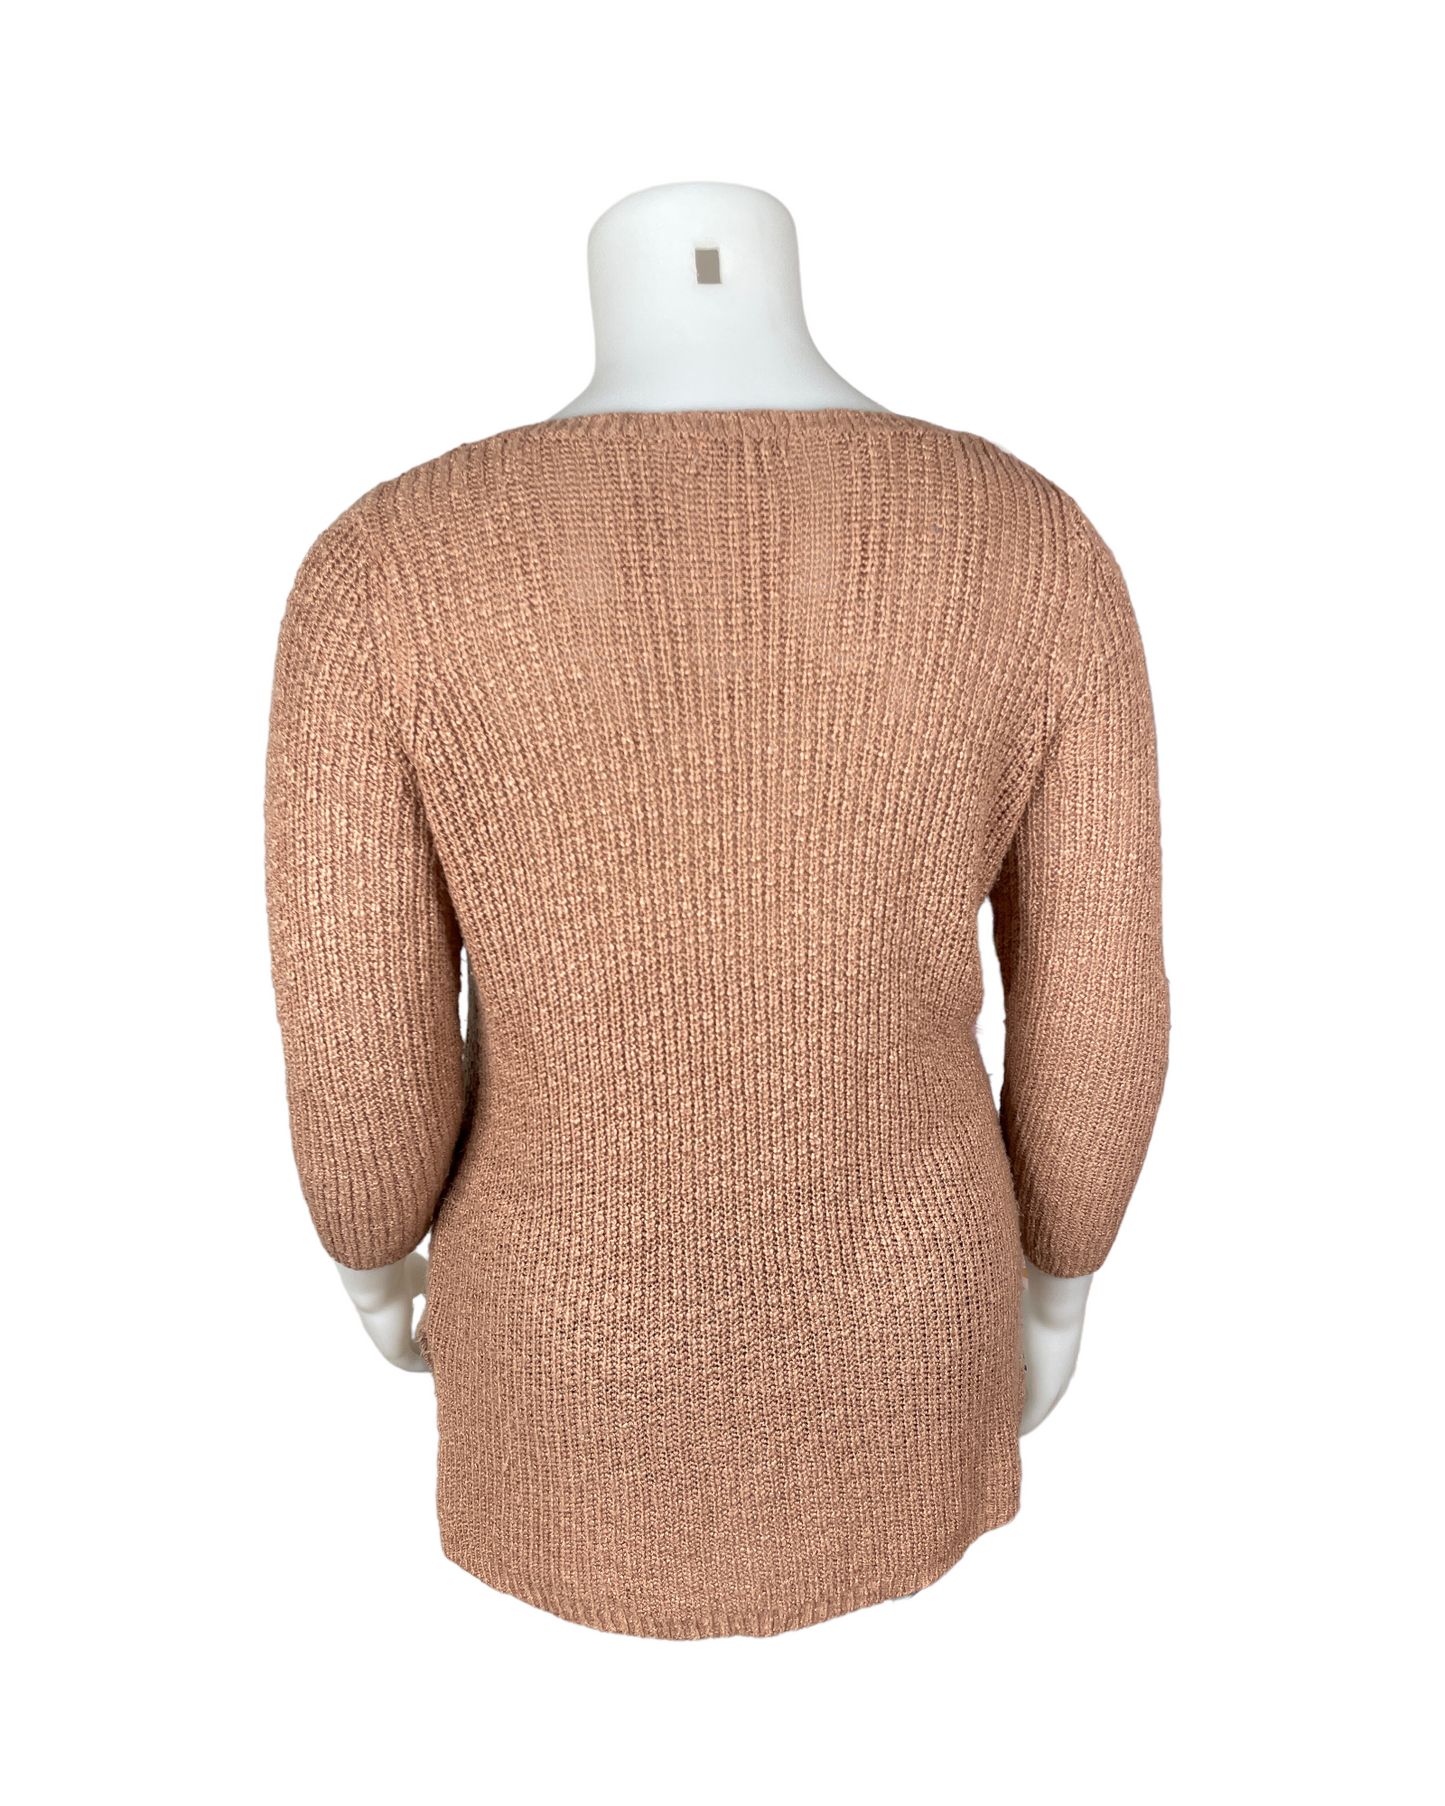 "Charlotte Russe" Pink Scoop-neck Sweater (2X)